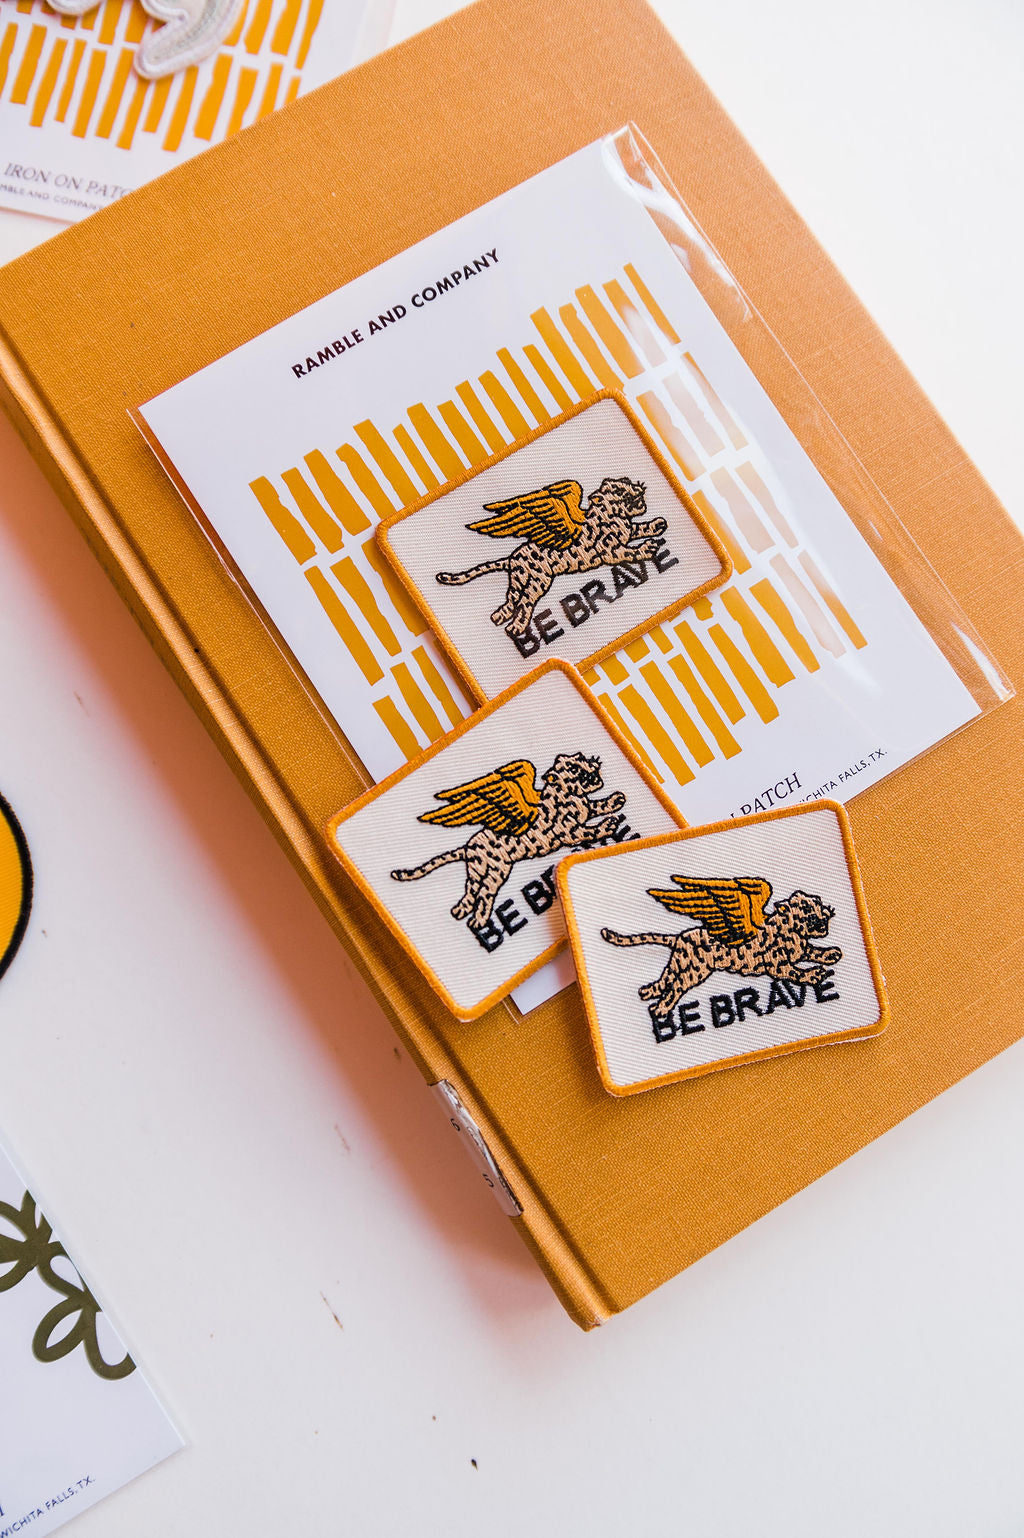 So many possibilities + ways to use these one-of-a-kind Ramble & Co. patches. the design: be brave the color: cream and black background  aprox. 2" x 2.5" To apply: Each patch is woven with an iron on backing.   Ramble & Co. is a family owned business. Shop at shop.rambleandcompany.com or visit our store in Wichita Falls, Texas || small batch/ hand printed tees + fine art prints | your source of encouragement + inspiration.